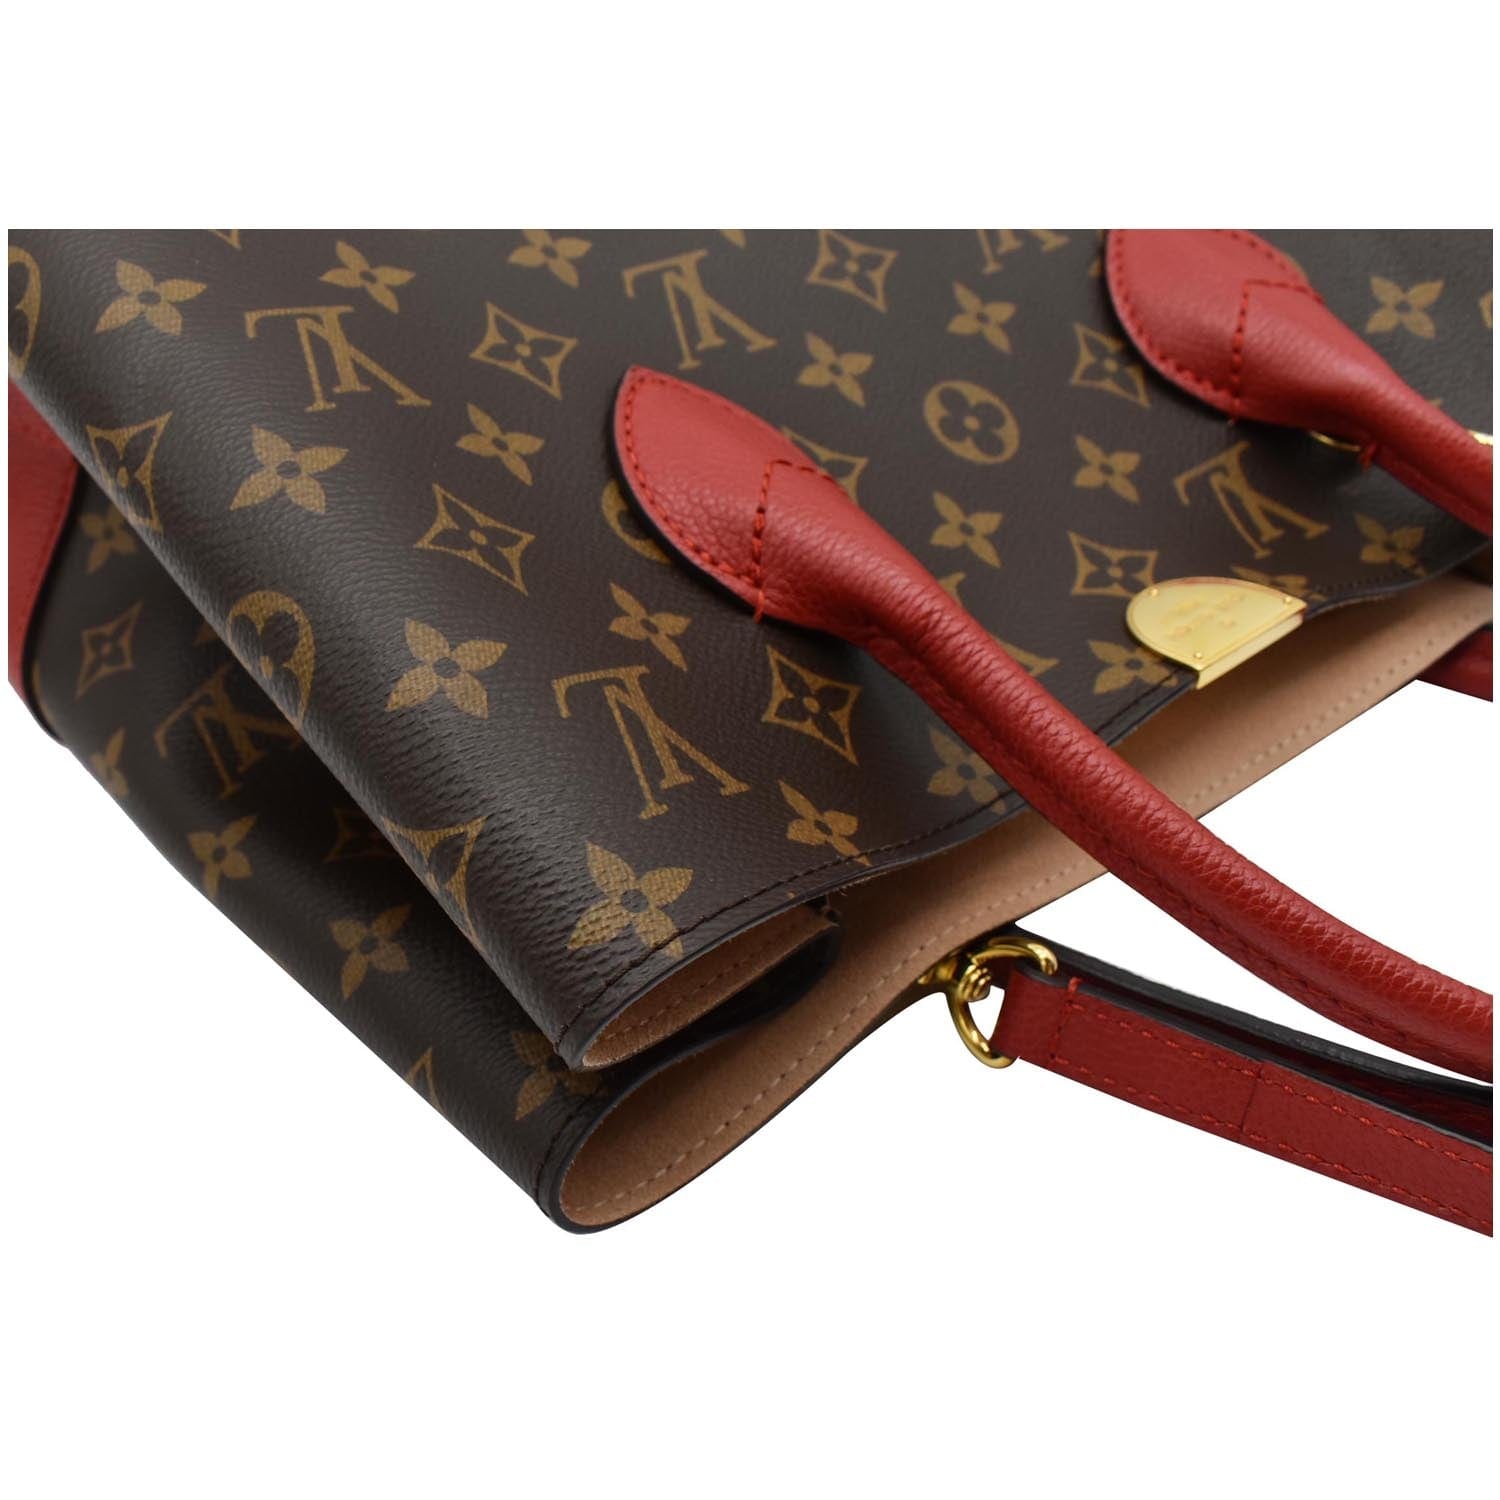 LV Red combination with Louis Vuitton Flandrin Handbag  Louis vuitton  purse, Louis vuitton fashion, Louis vuitton handbags